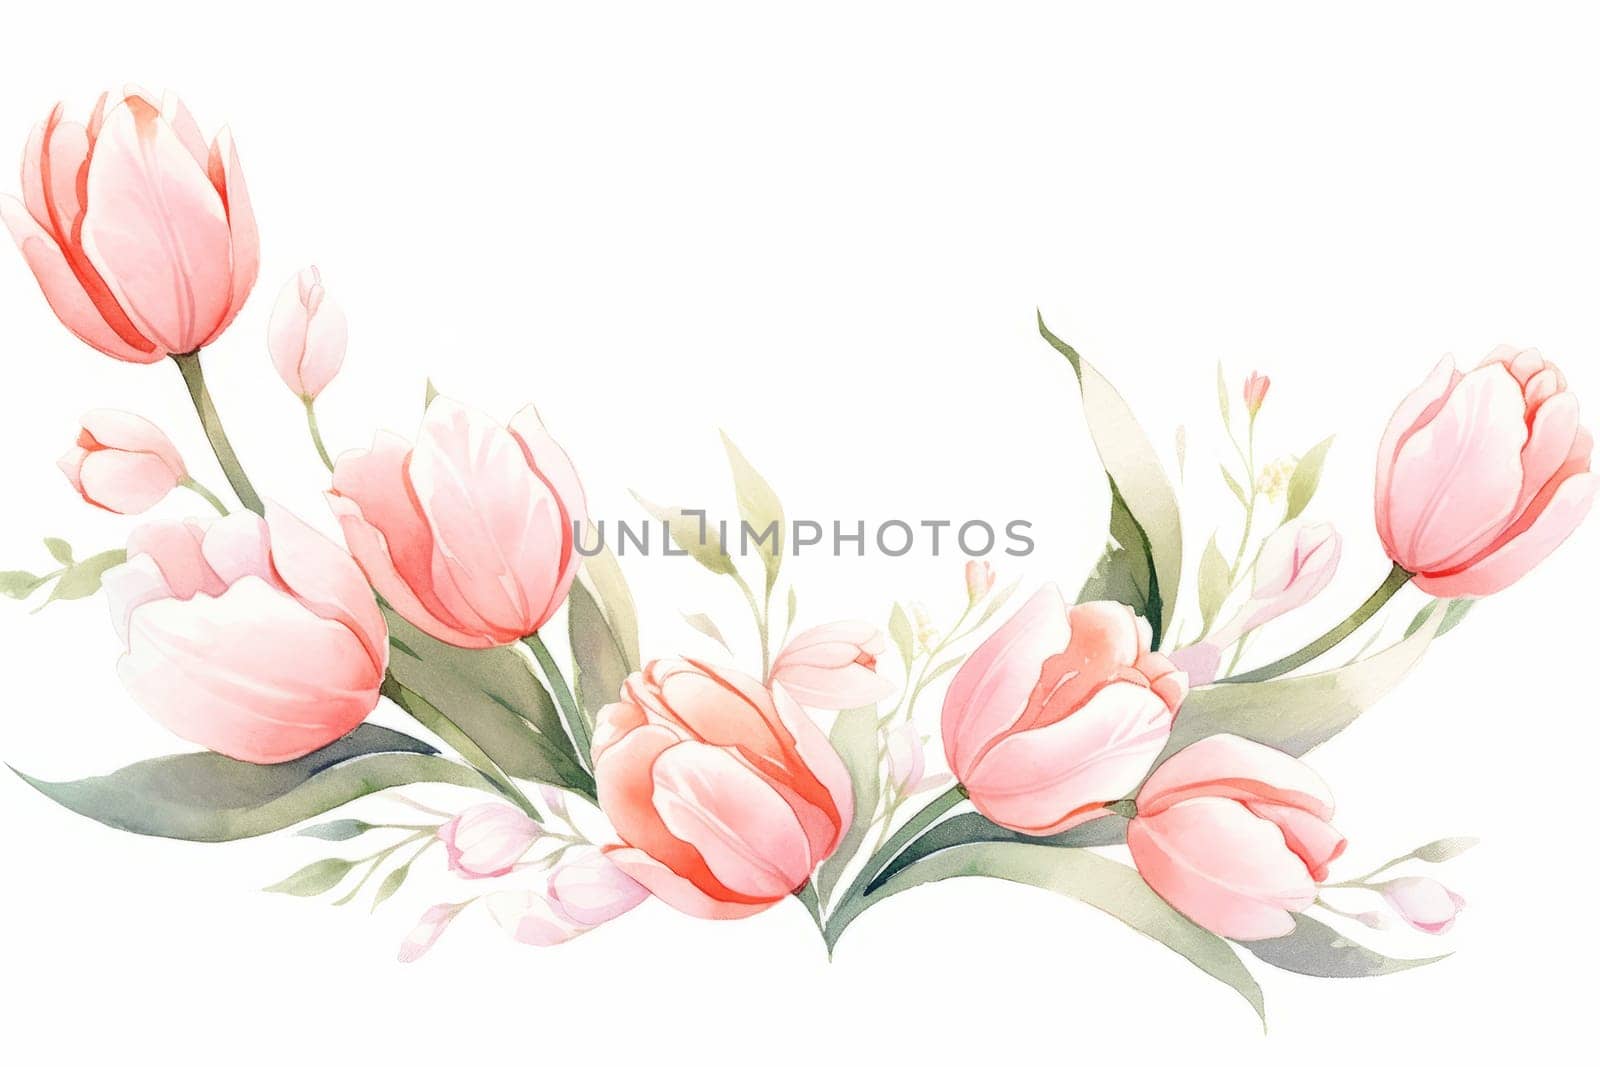 Tulips flower hand painted watercolor illustration. by Artsiom